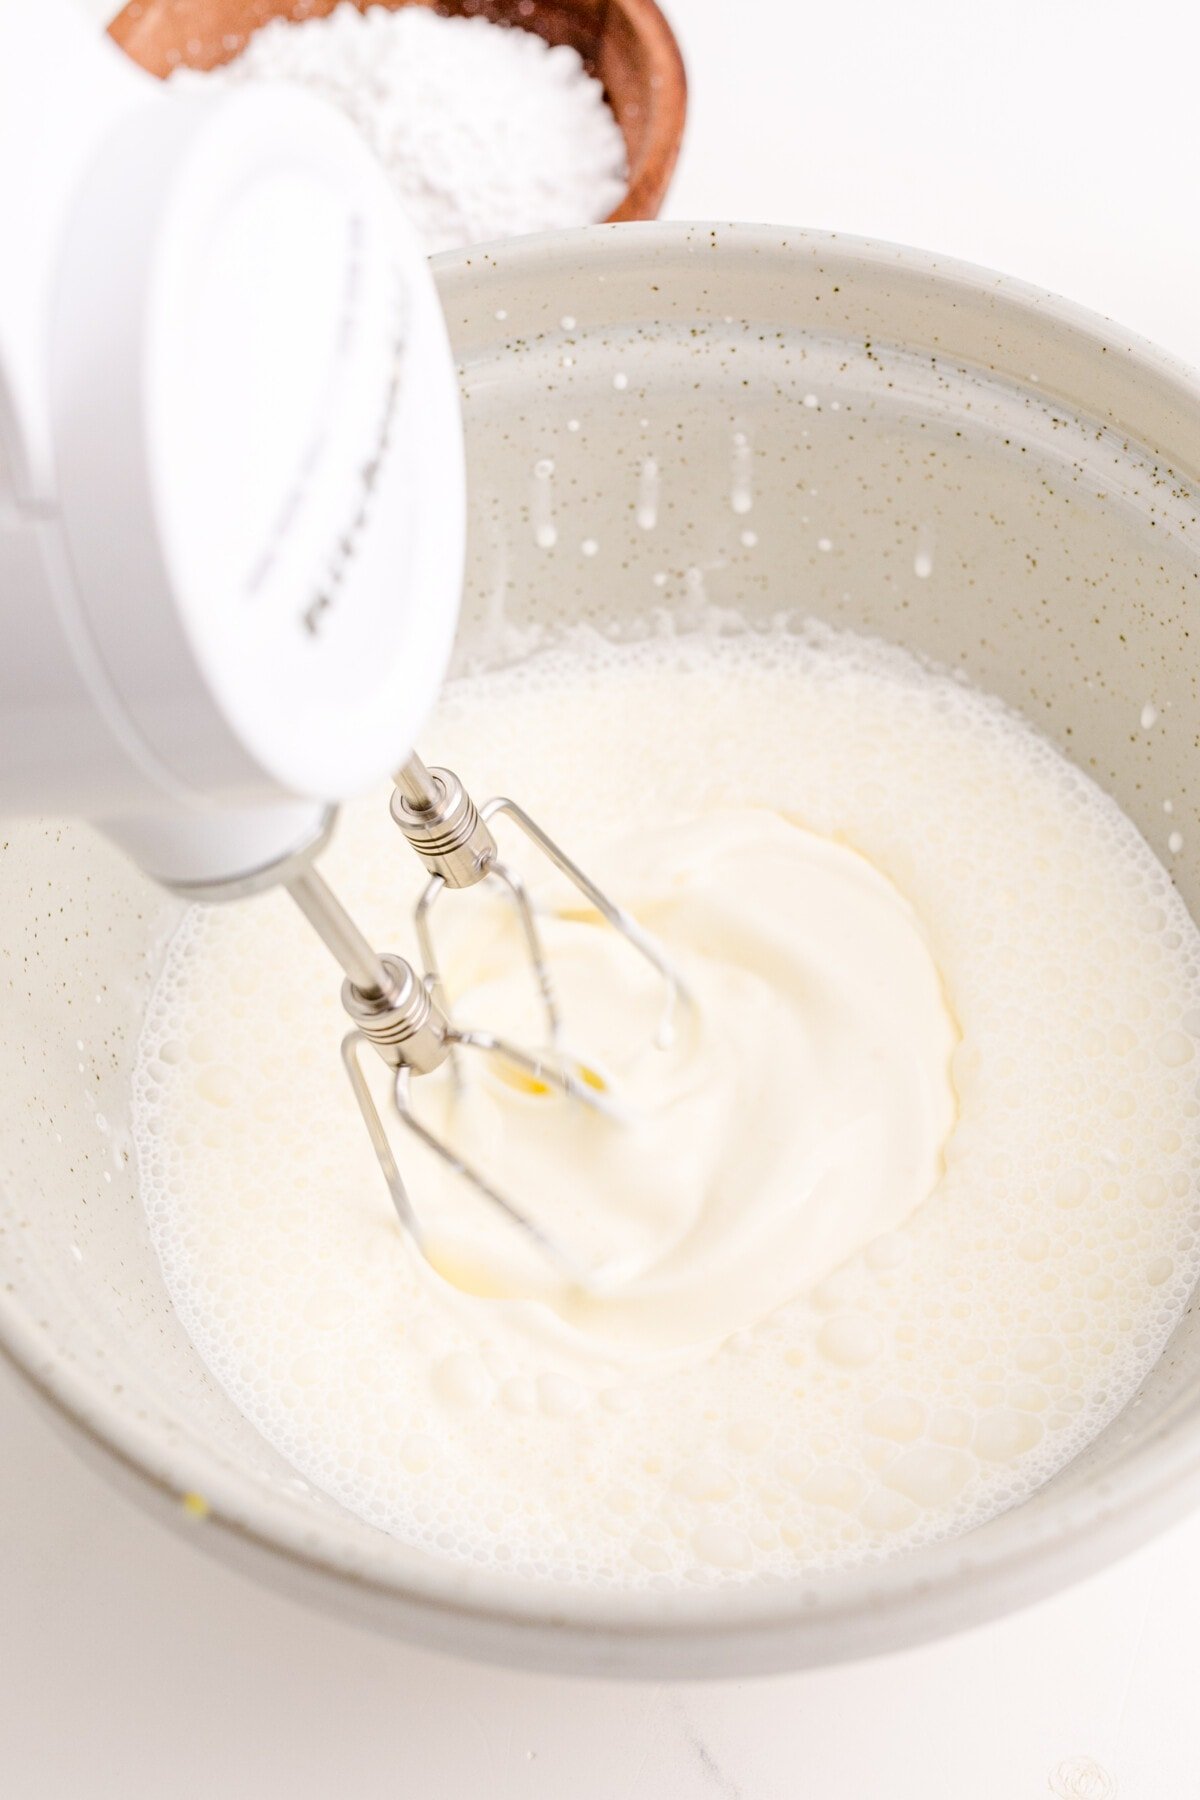 beating heaving cream with a hand mixer